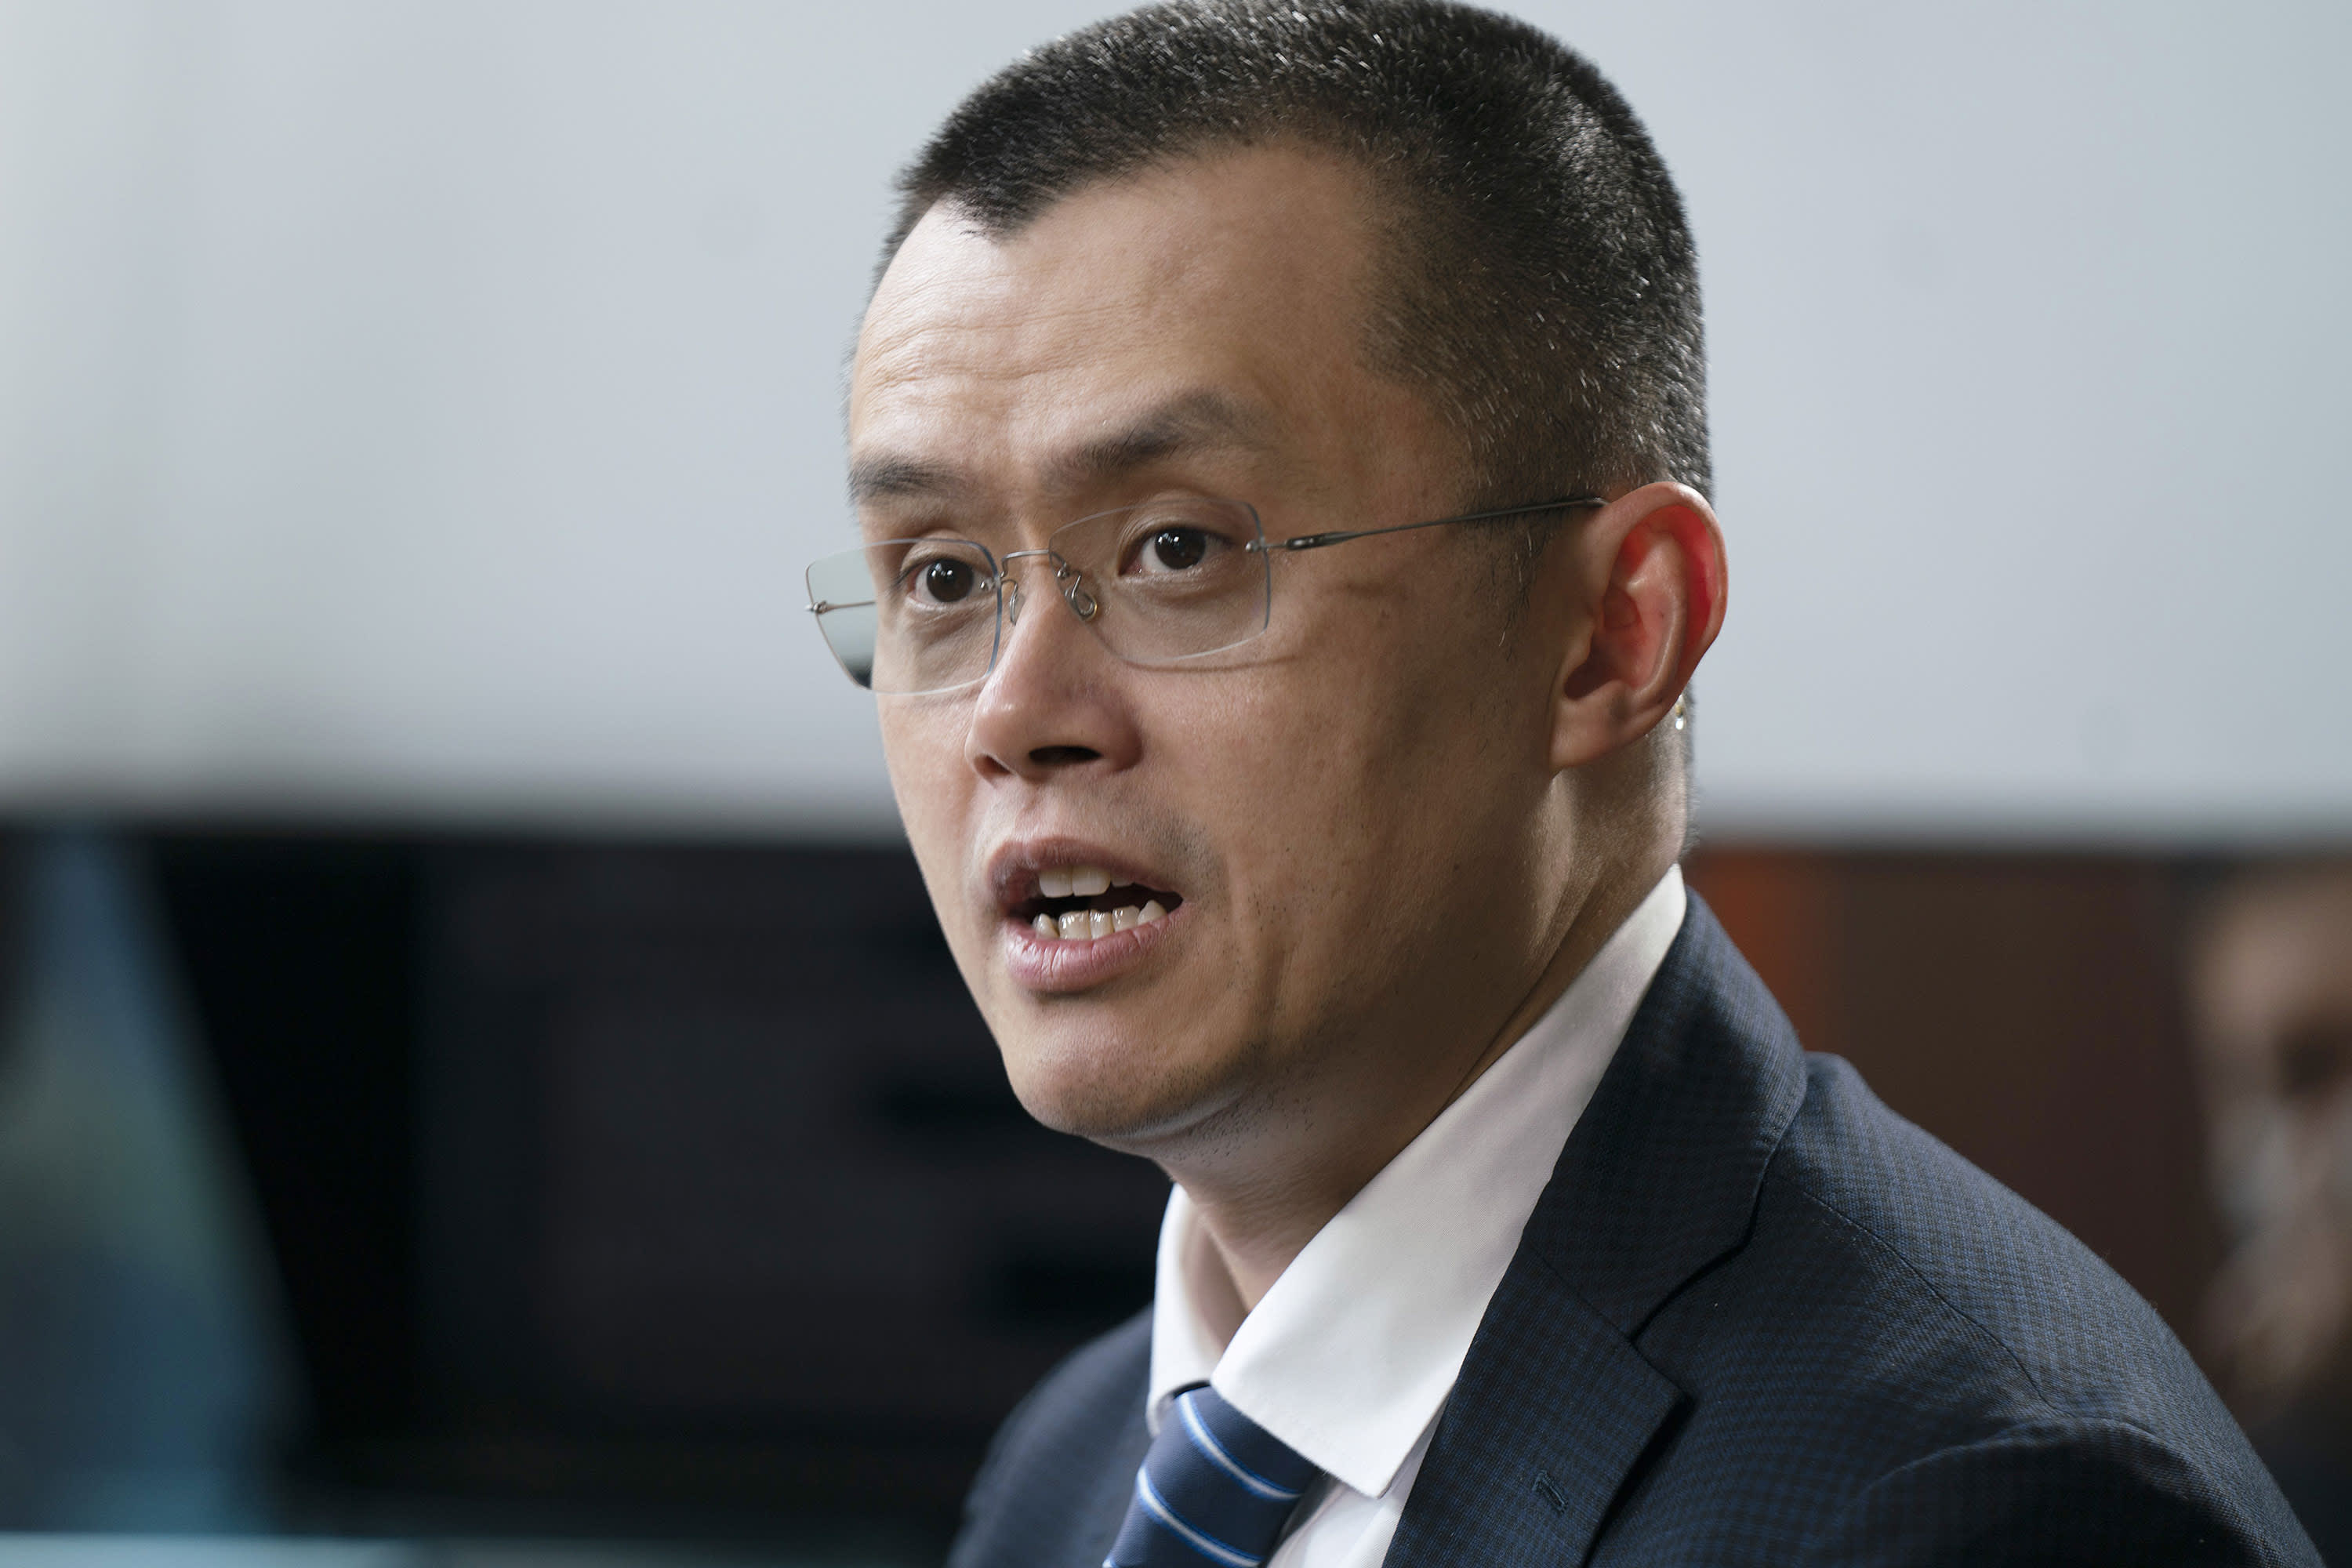 Binance, led by crypto billionaire, takes huge stake